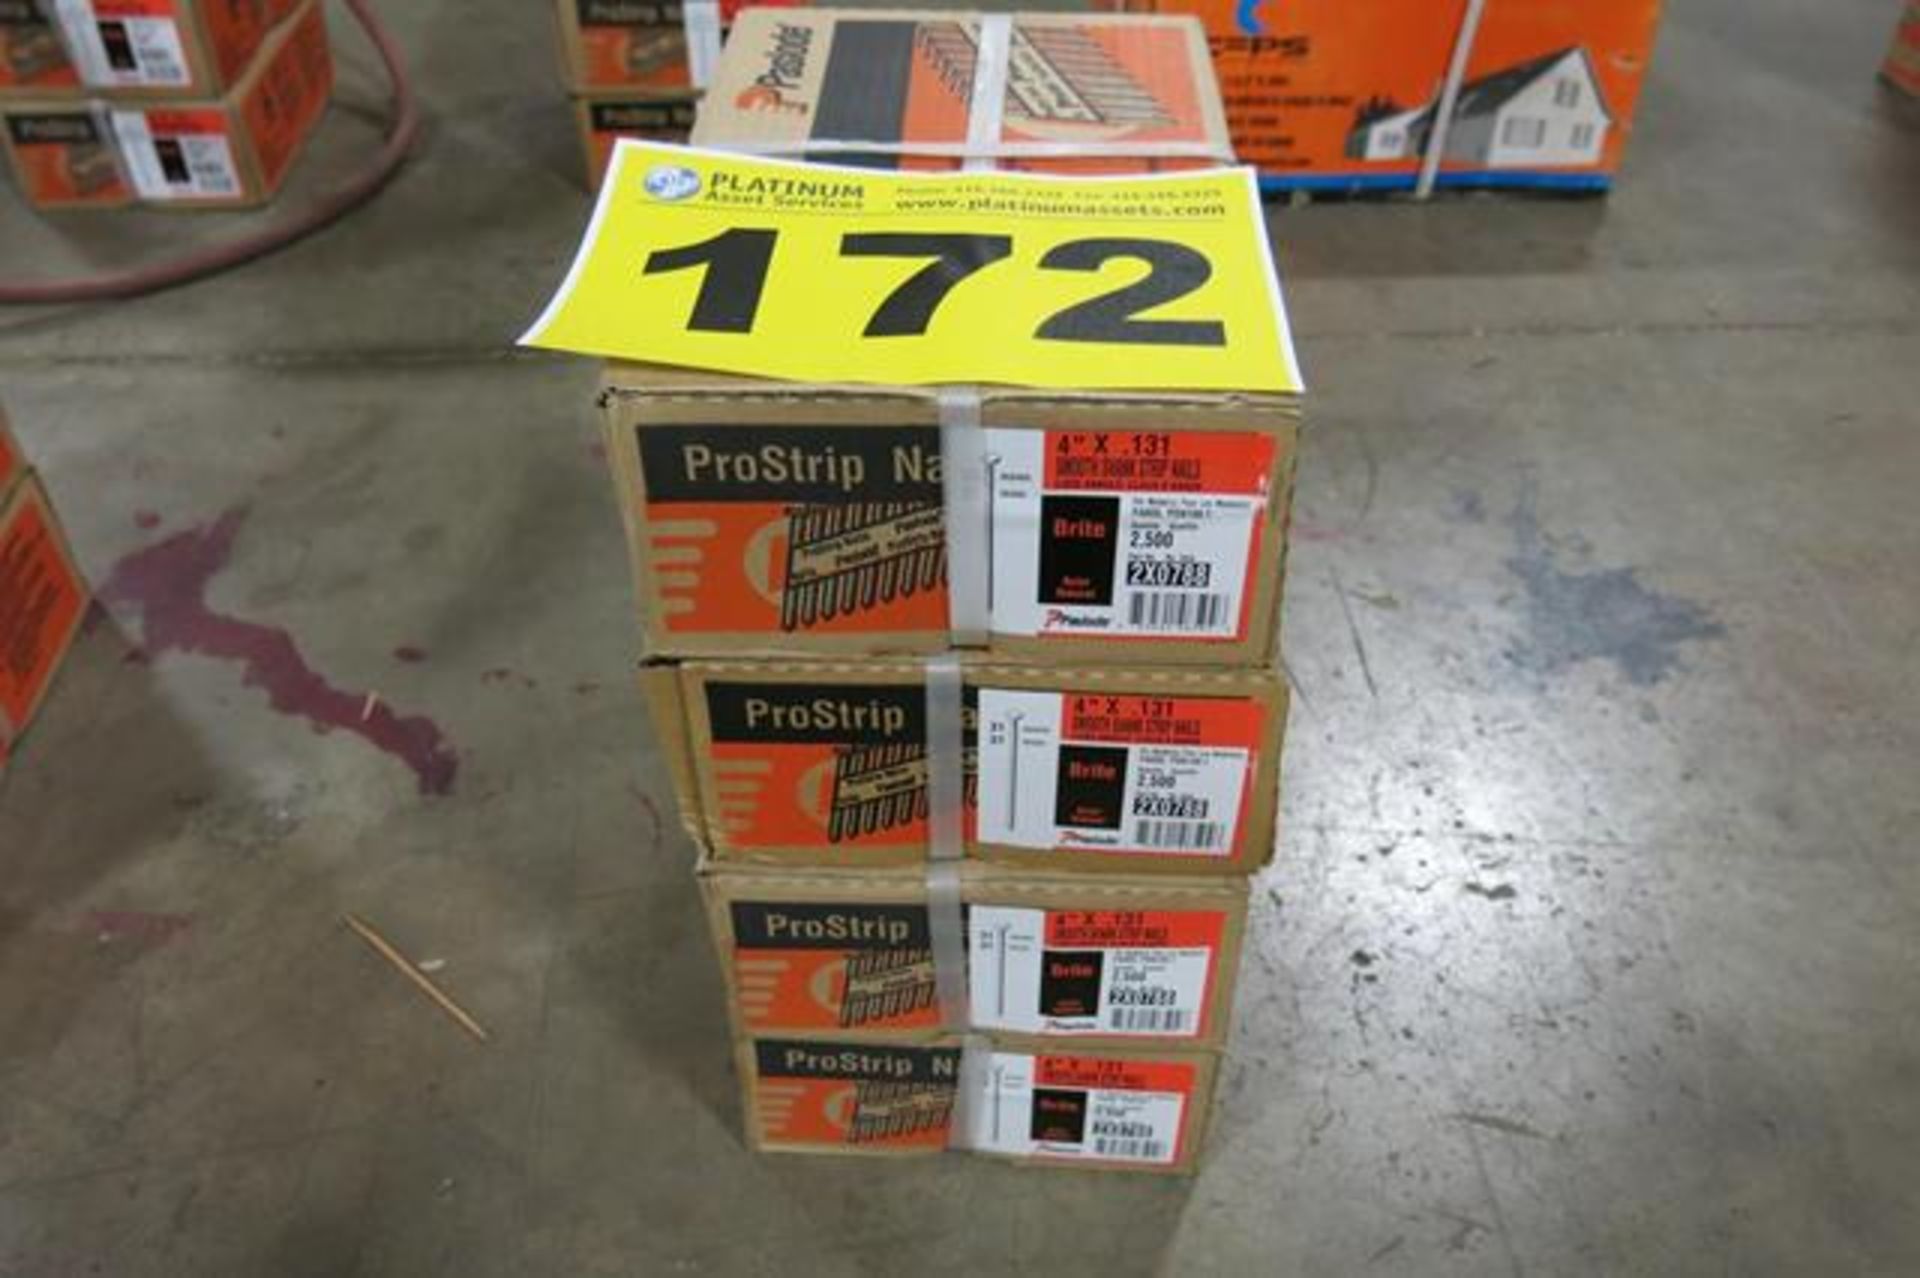 PASLODE, 2X0788, 4" X 1.31 DIA, PROSTRIP NAILS, 2,500 APPROX. - NEW